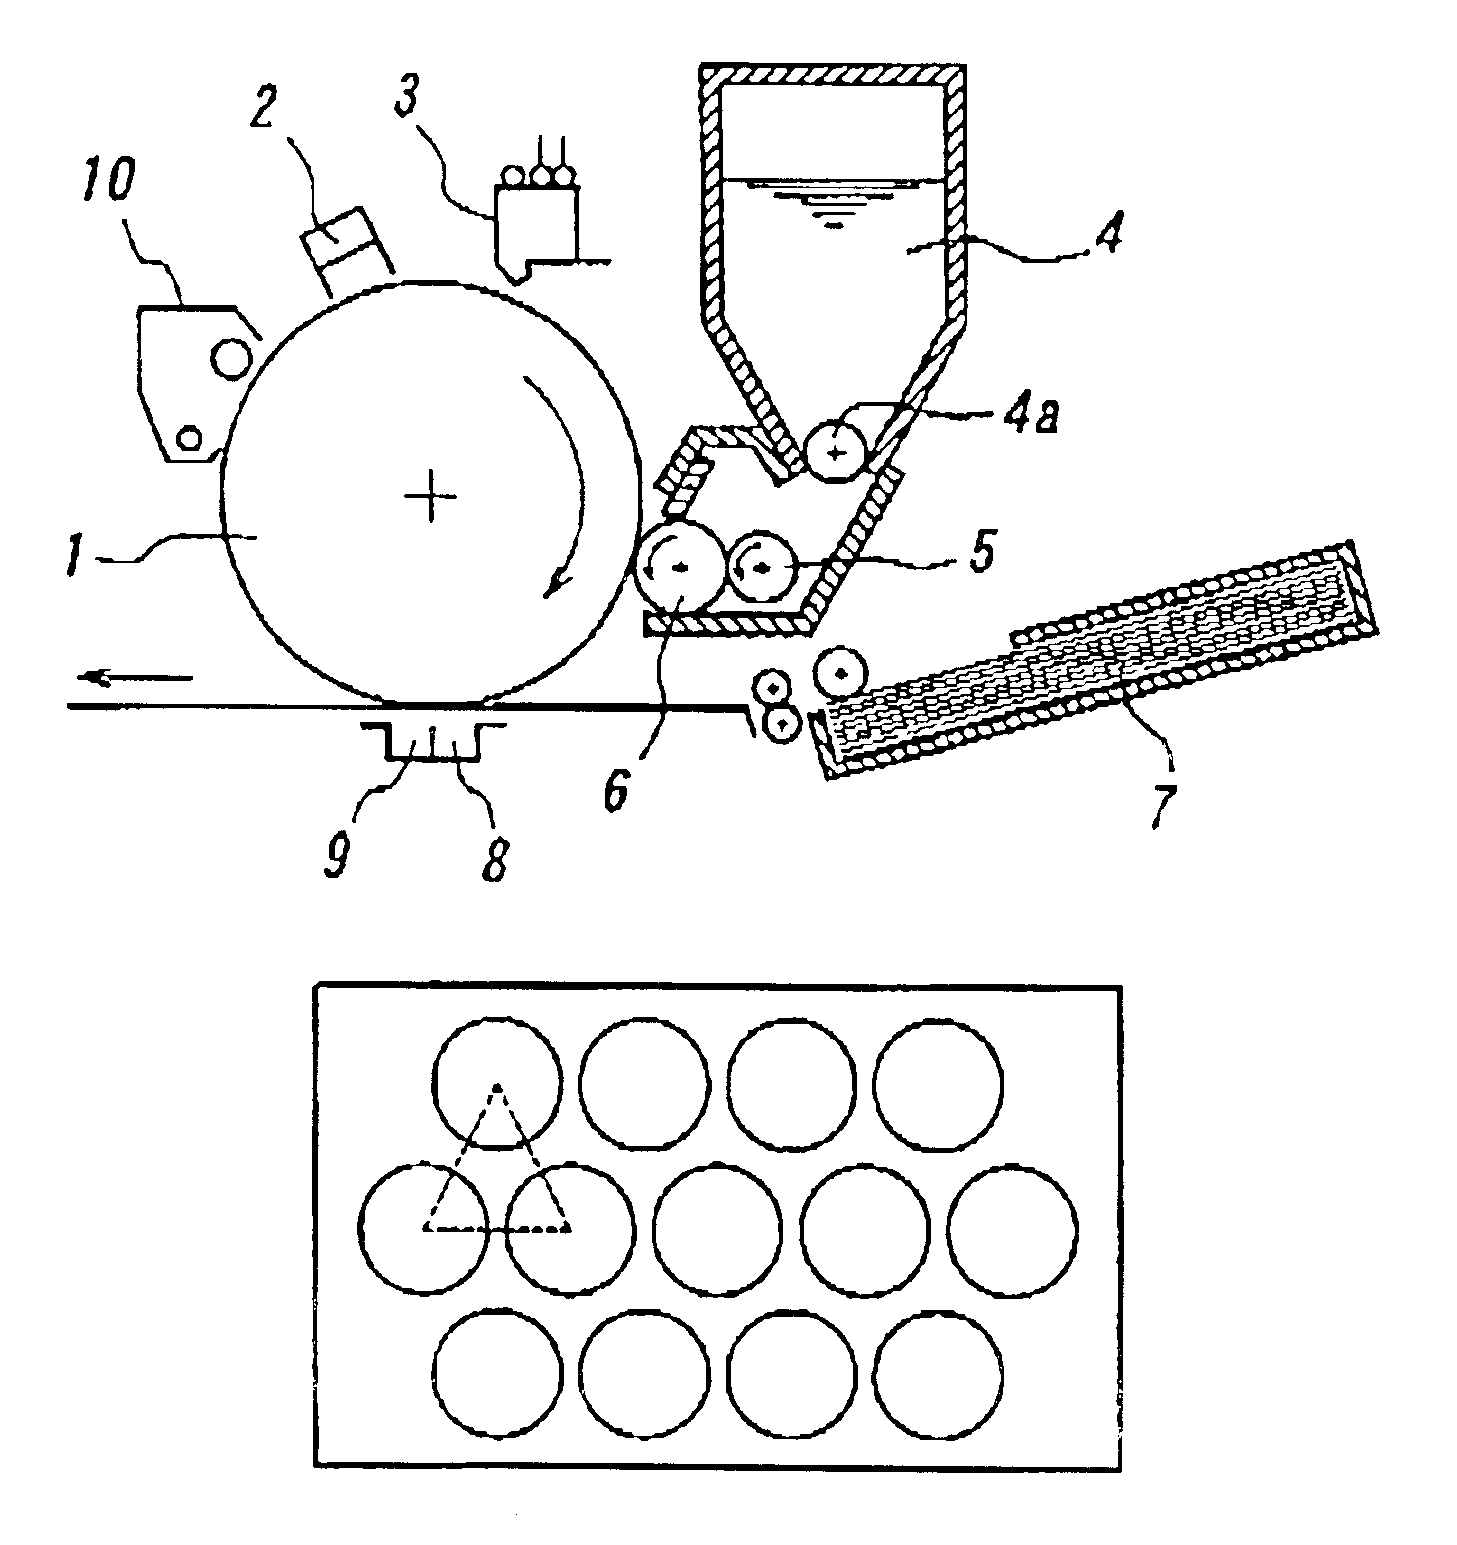 Foamed elastic member for use in image forming apparatus